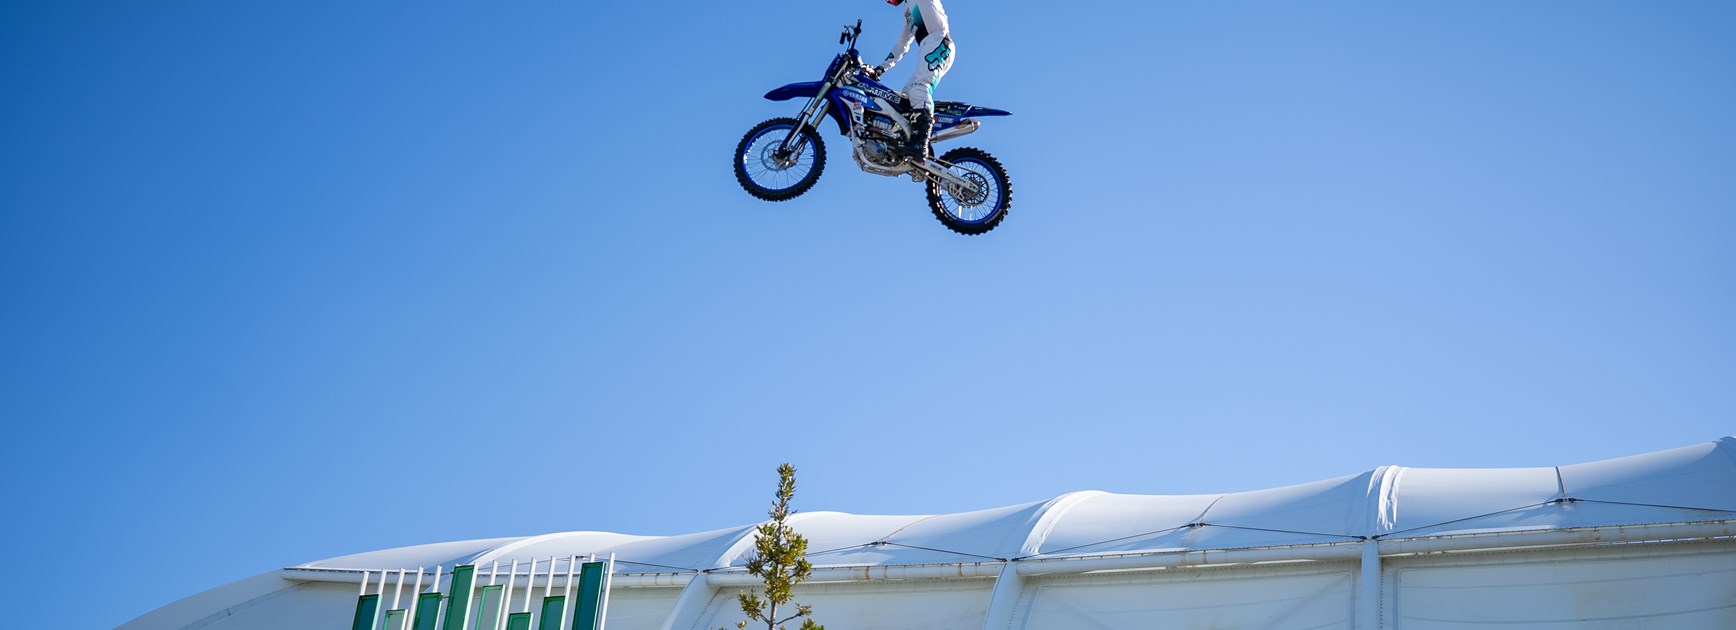 Show times announced for FMX entertainment this Saturday